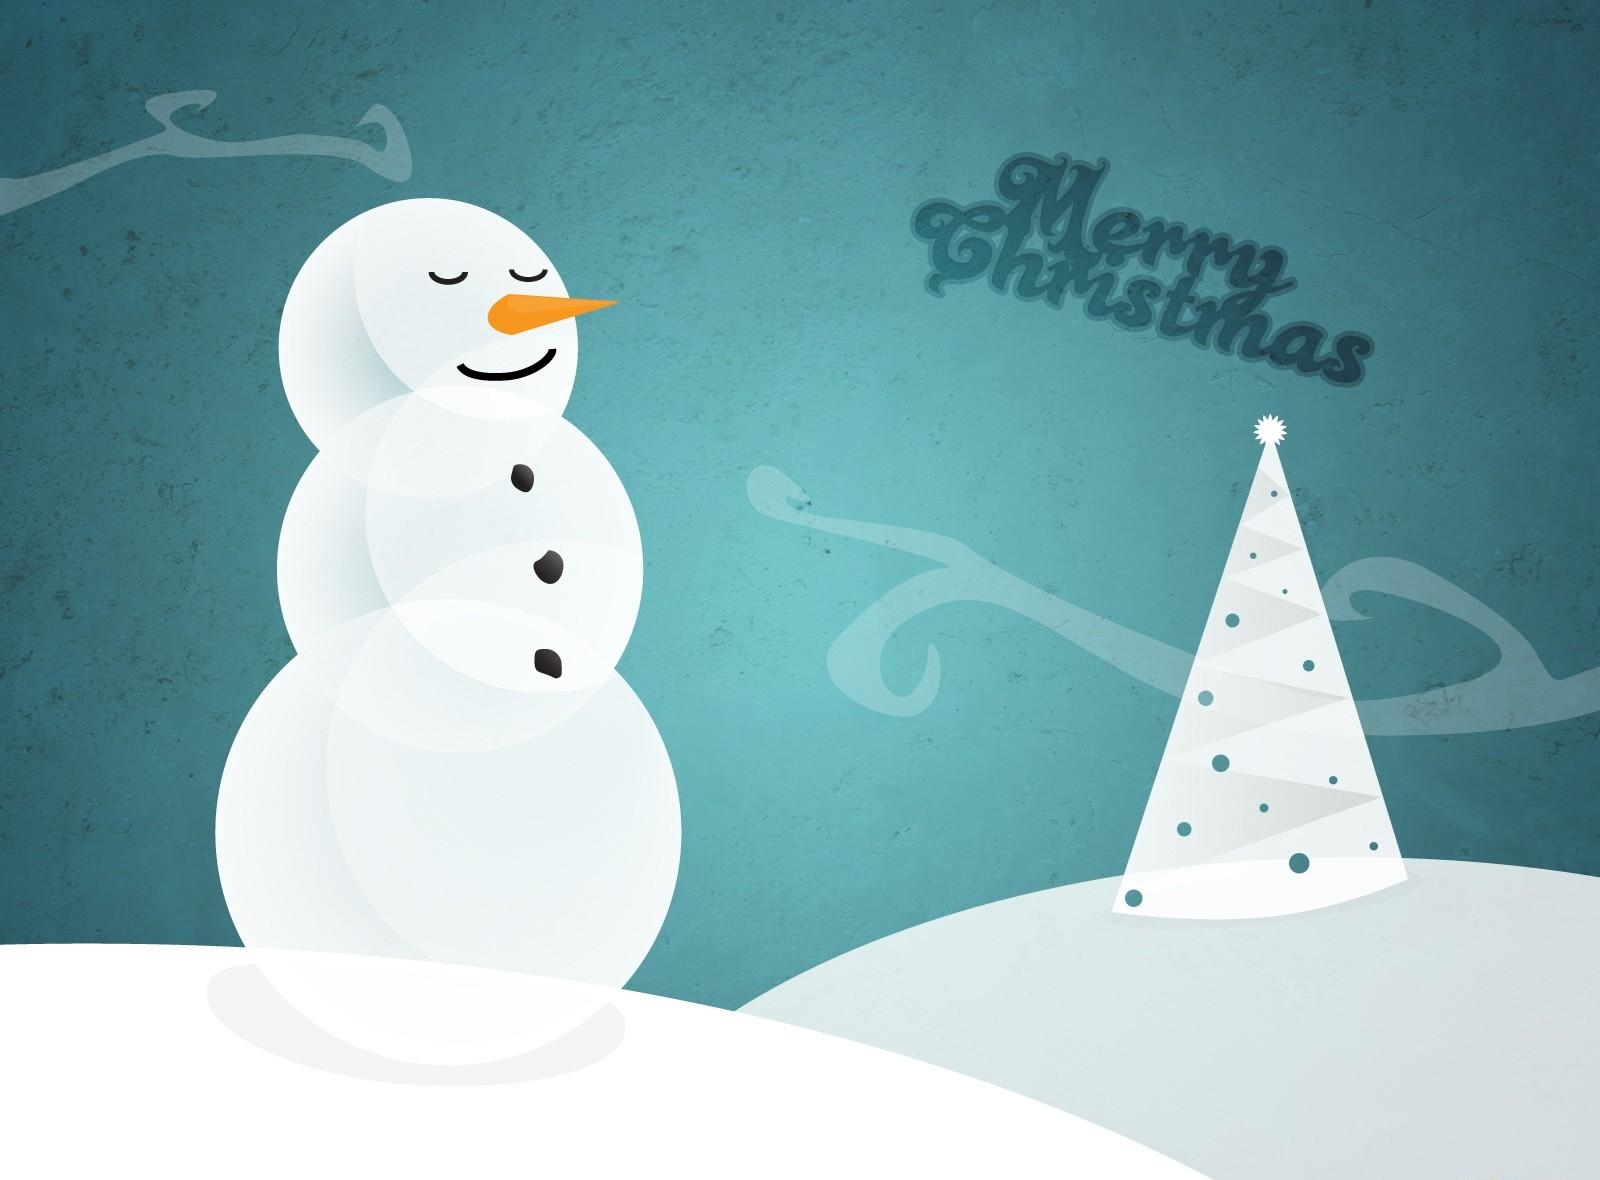 New Lock Screen Wallpapers holidays, snowman, christmas, inscription, christmas tree, wishes